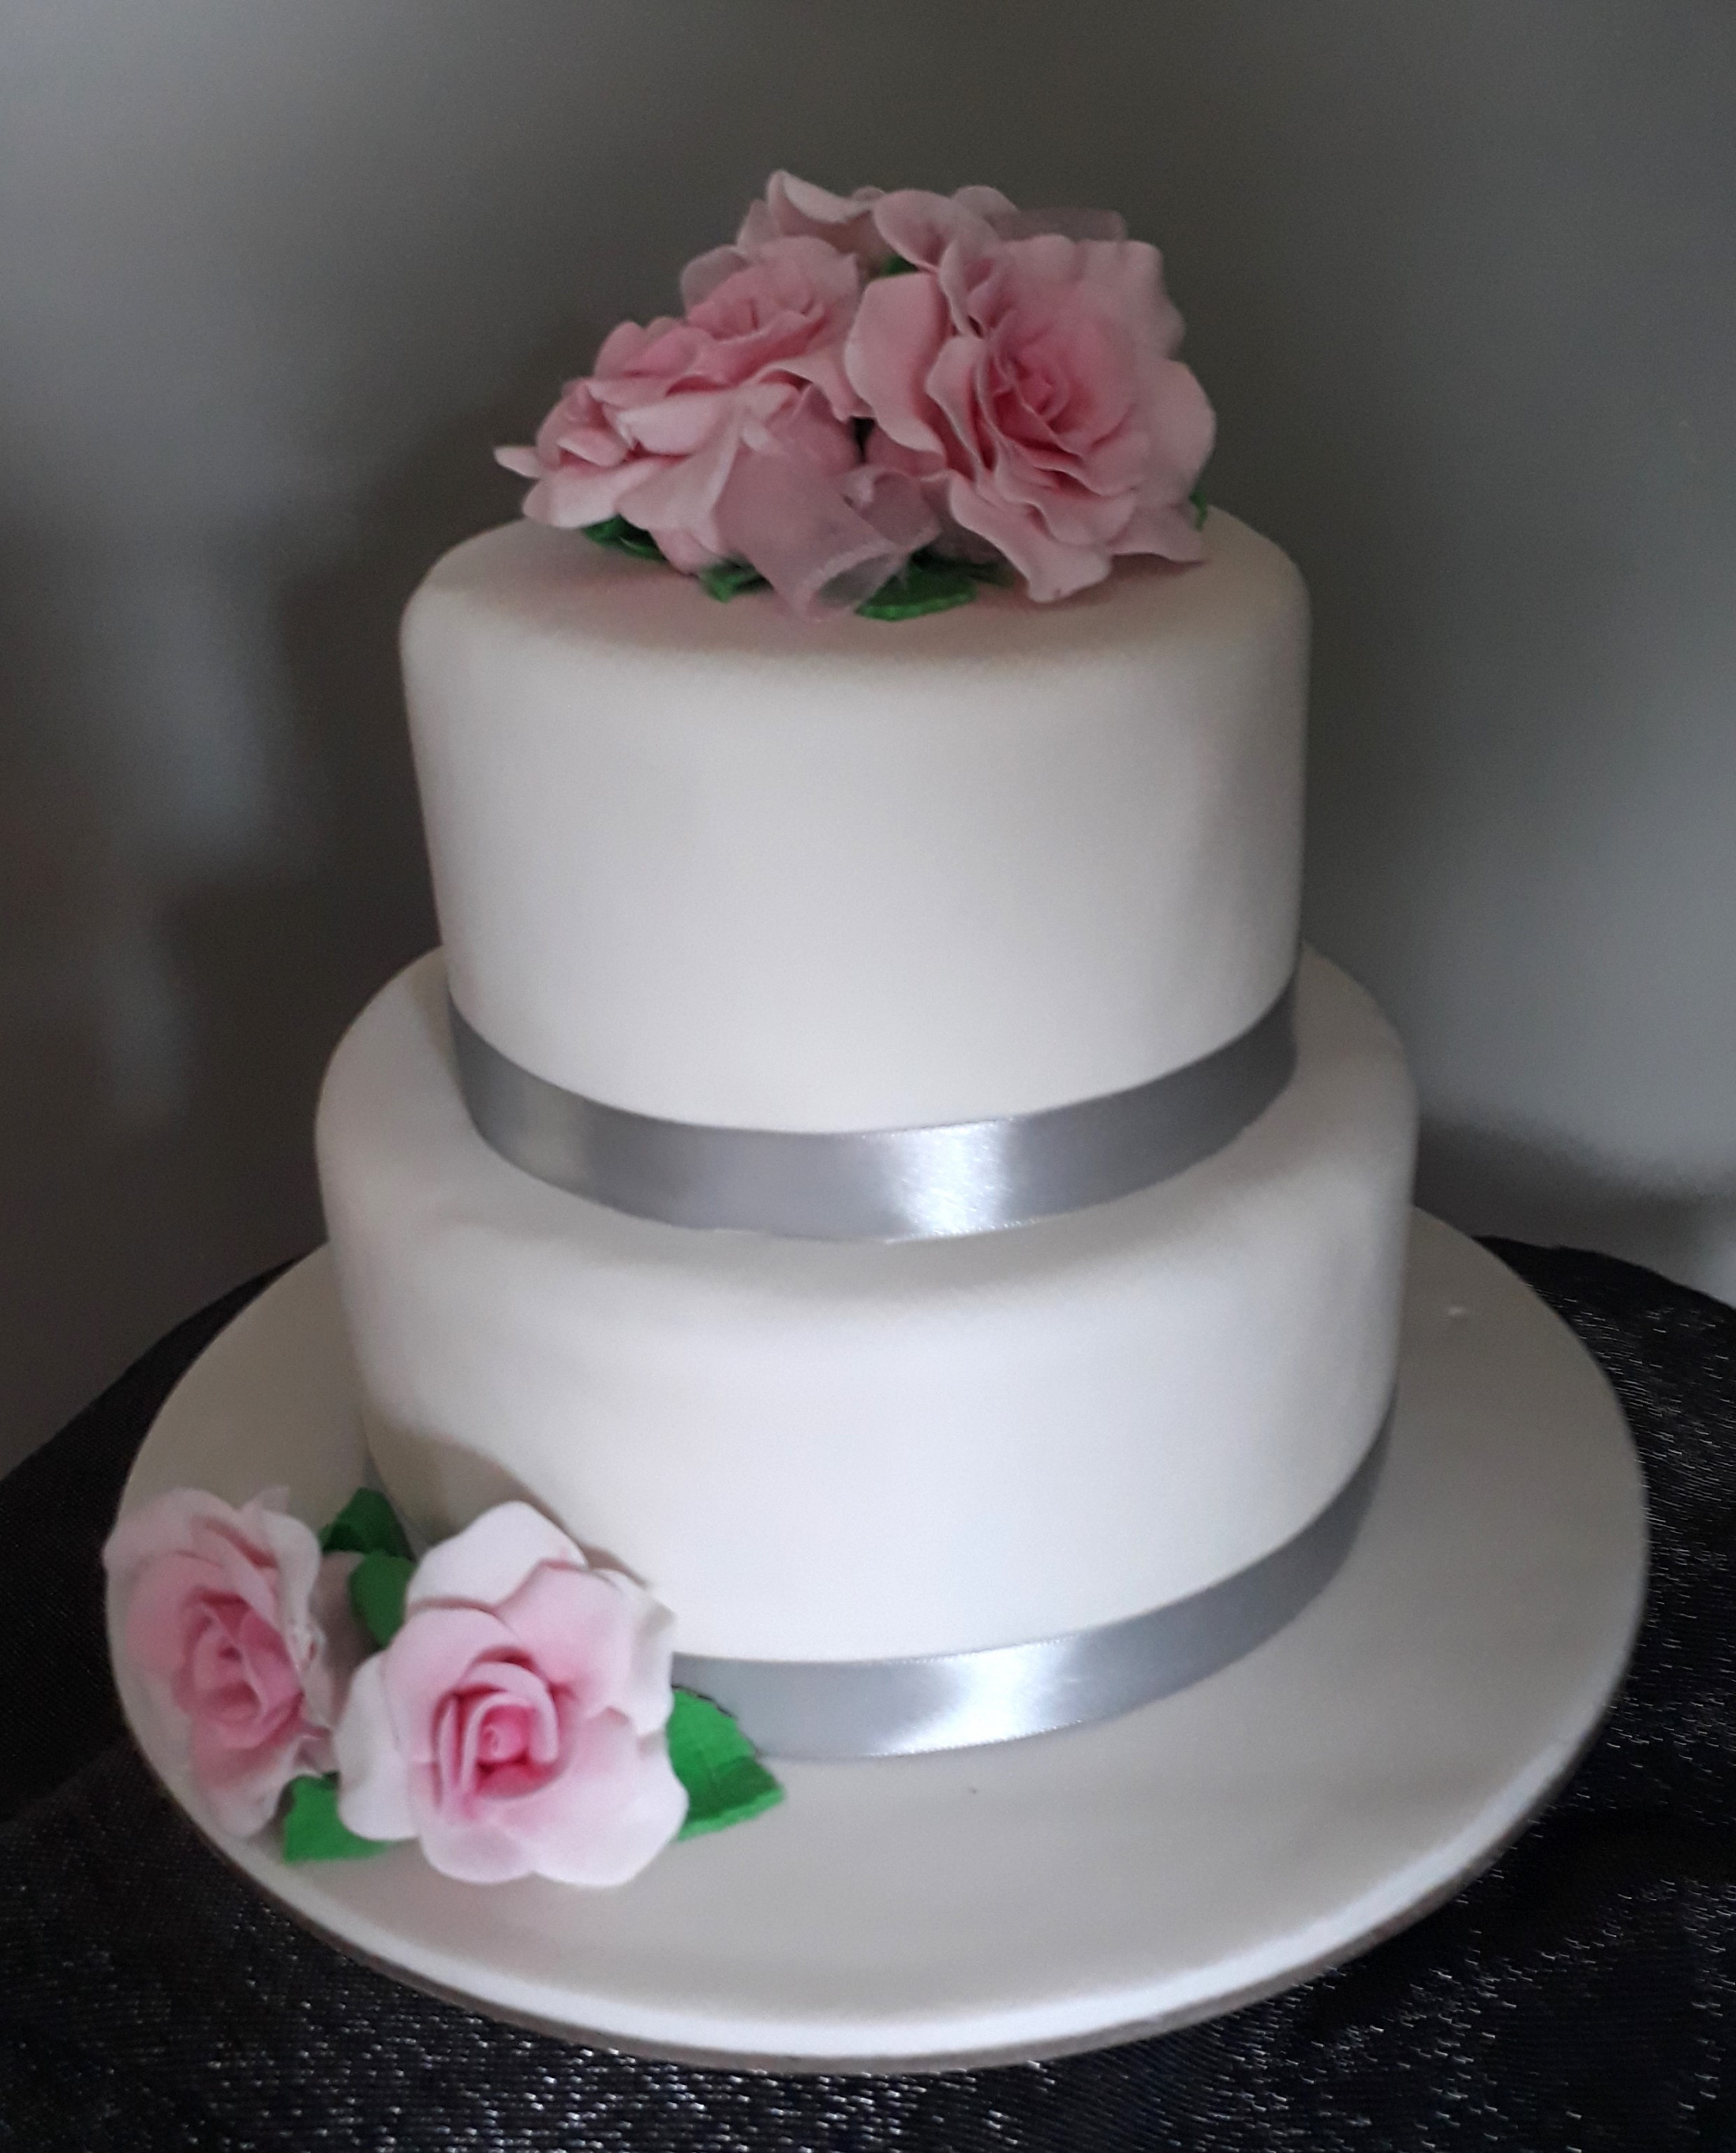 Cake Decorating - Make Icing Roses and Decorate a 2 Tier Wedding/Birthday Cake